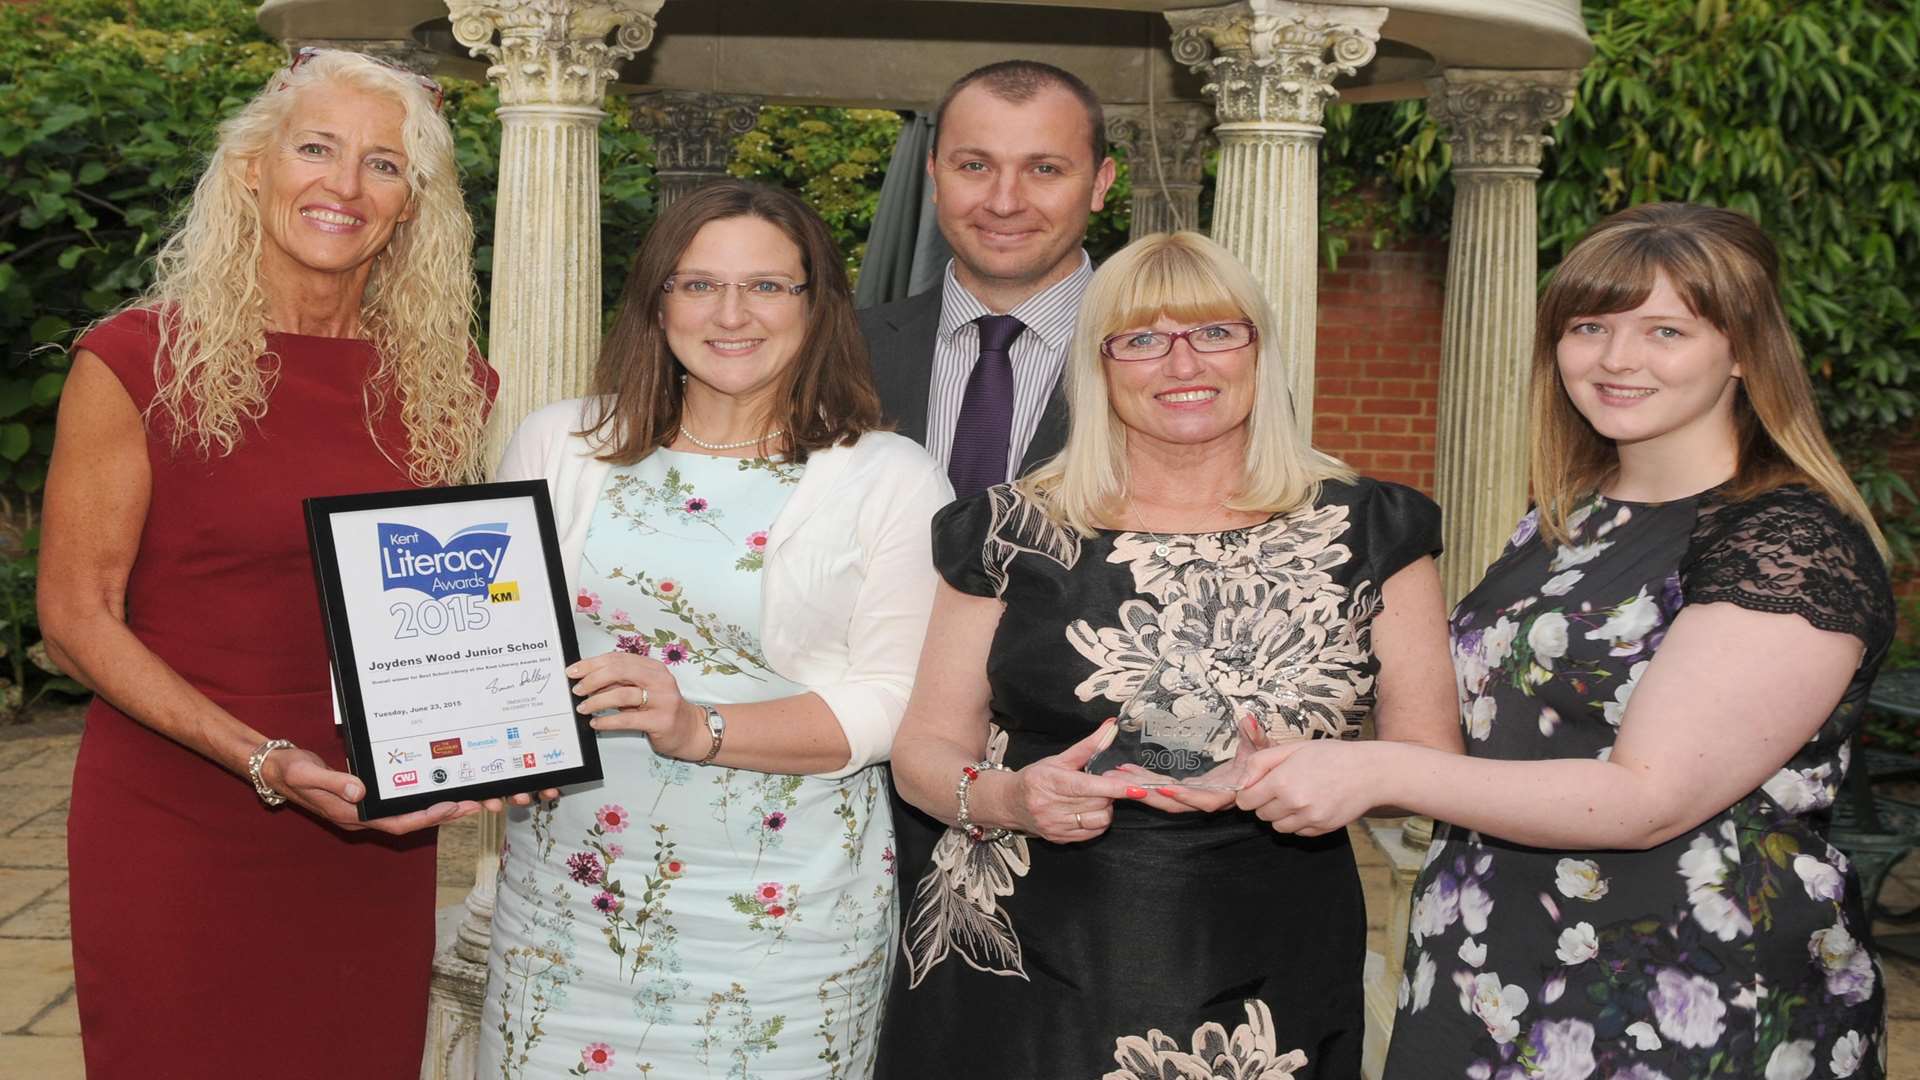 Mandy Holdstock of Hempstead House (left) and Bethany Taylor (right) of Canterbury Tales present the team from Joydens Wood Junior School with the Best School Library Award at the Kent Literacy Awards 2015.